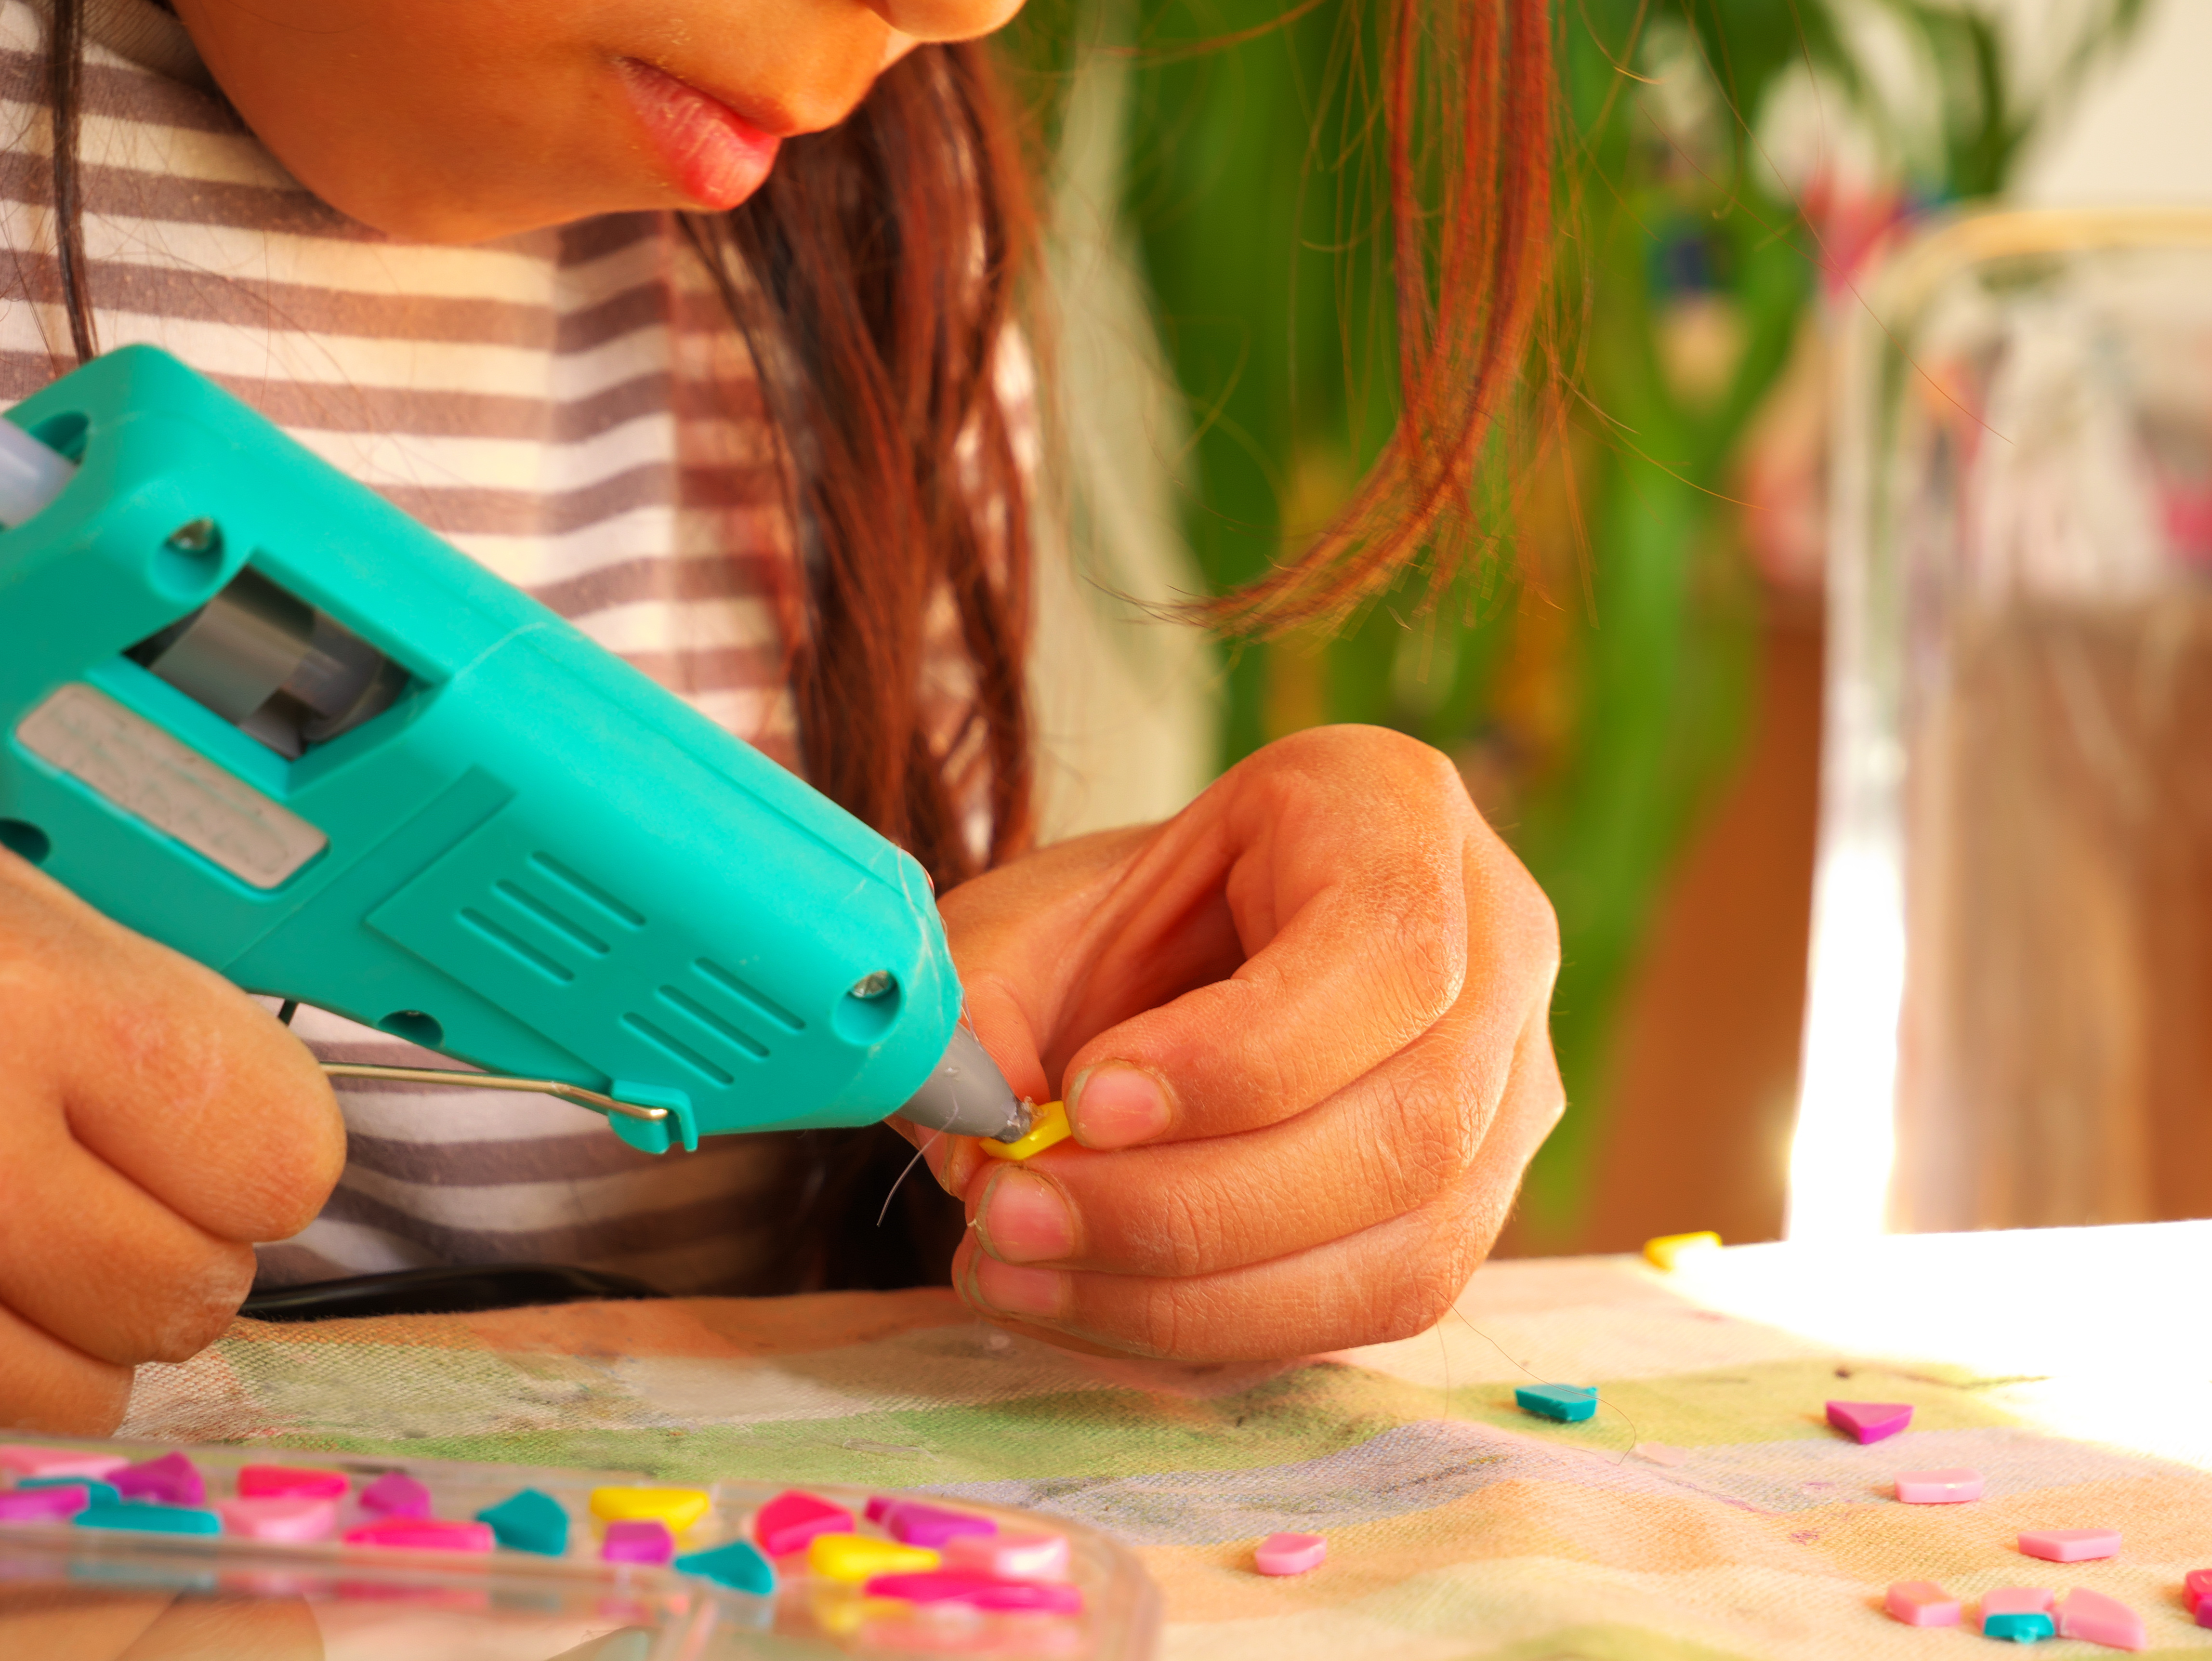 The Best Hot Glue Gun for Crafts * Moms and Crafters